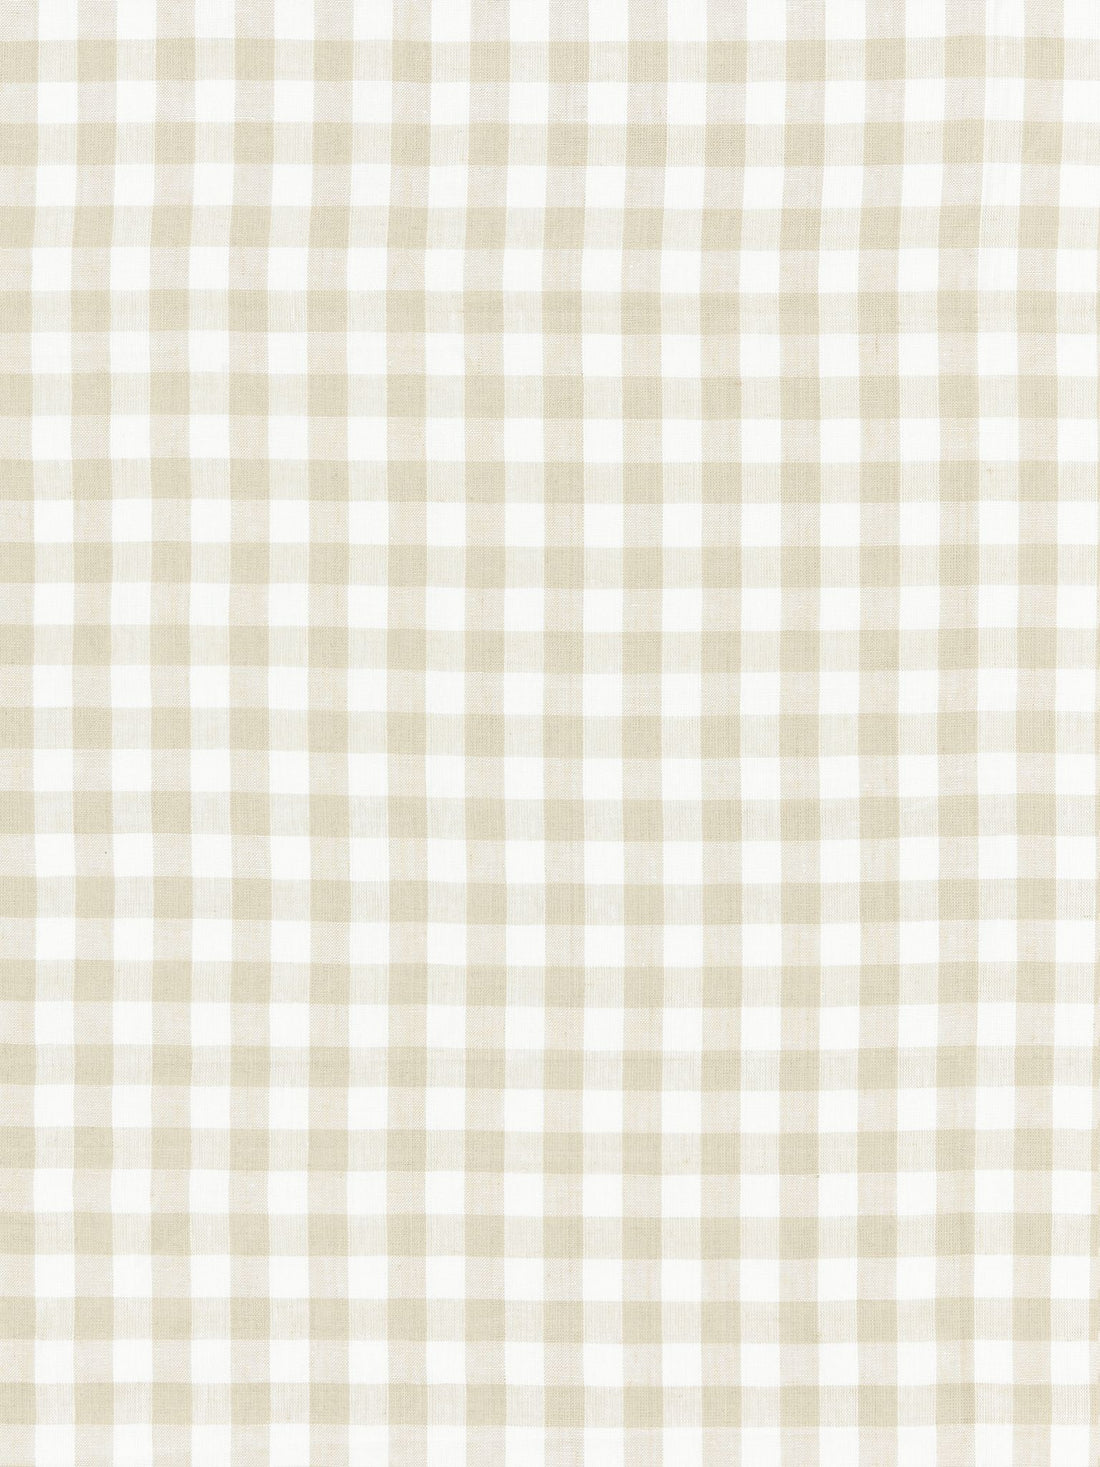 Swedish Linen Check fabric in flax color - pattern number SC 000227166 - by Scalamandre in the Scalamandre Fabrics Book 1 collection